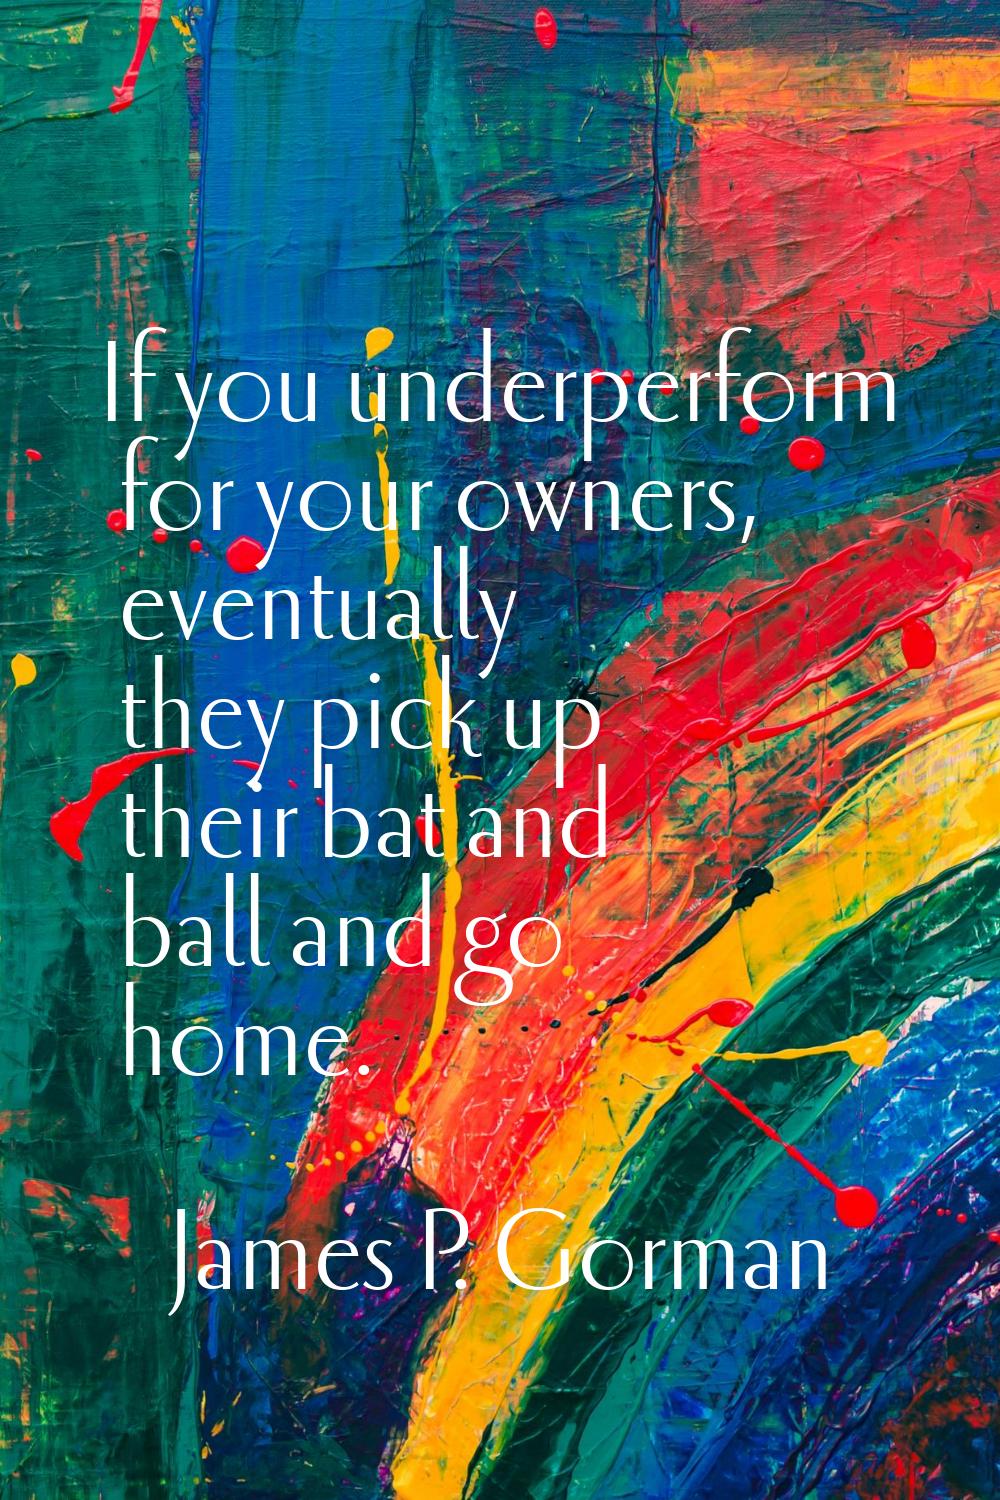 If you underperform for your owners, eventually they pick up their bat and ball and go home.